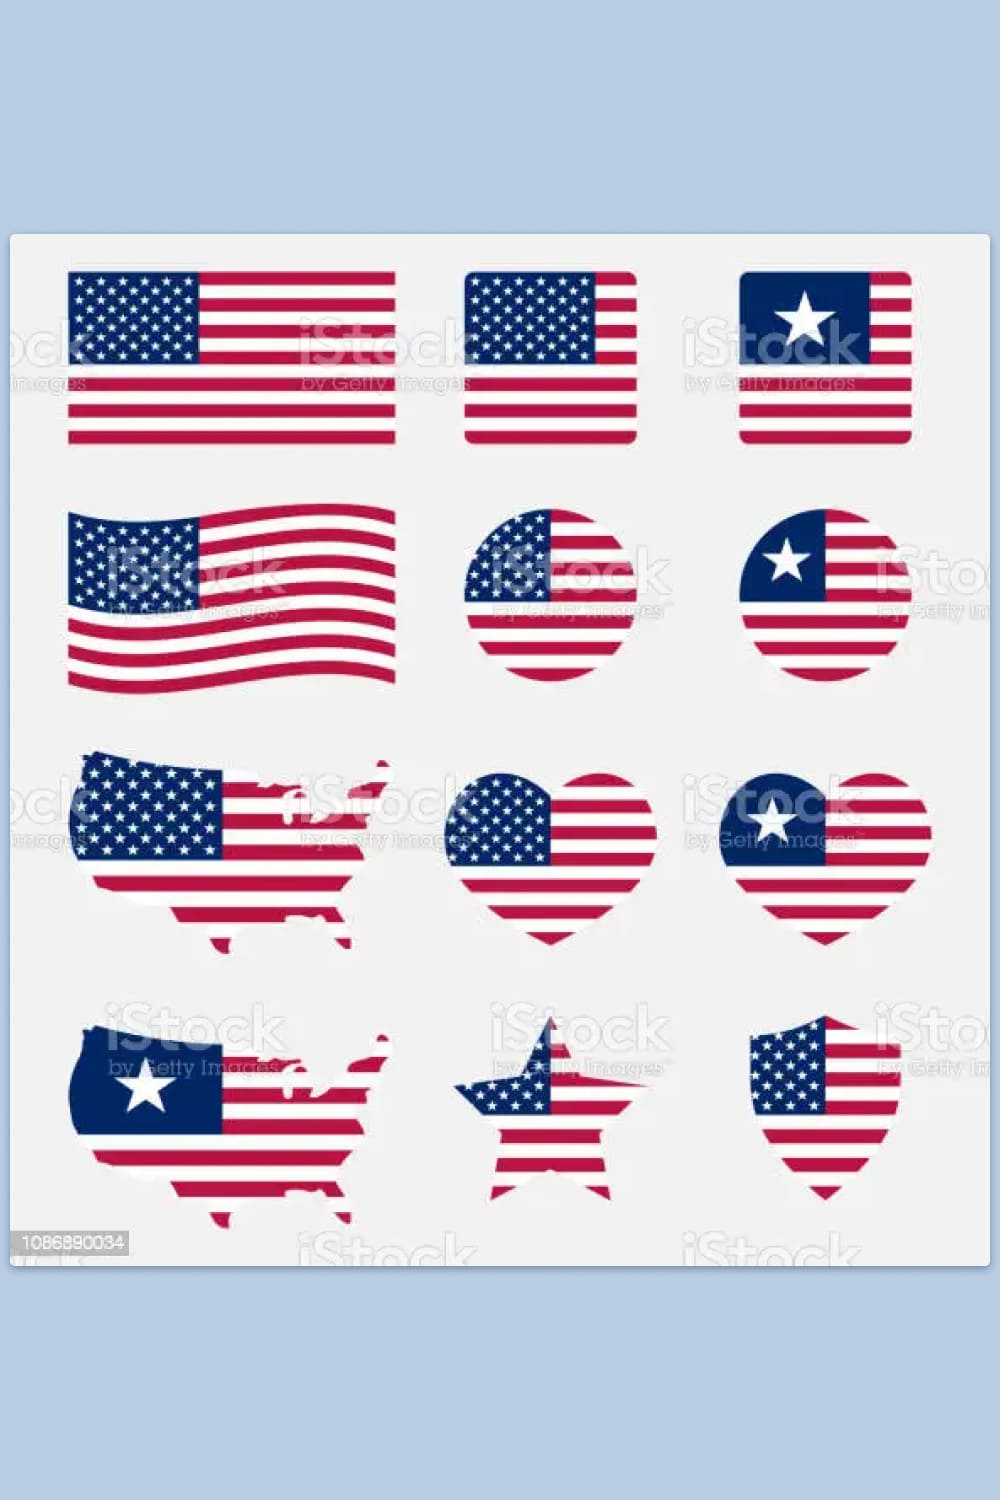 Collage of American flag drawing options.